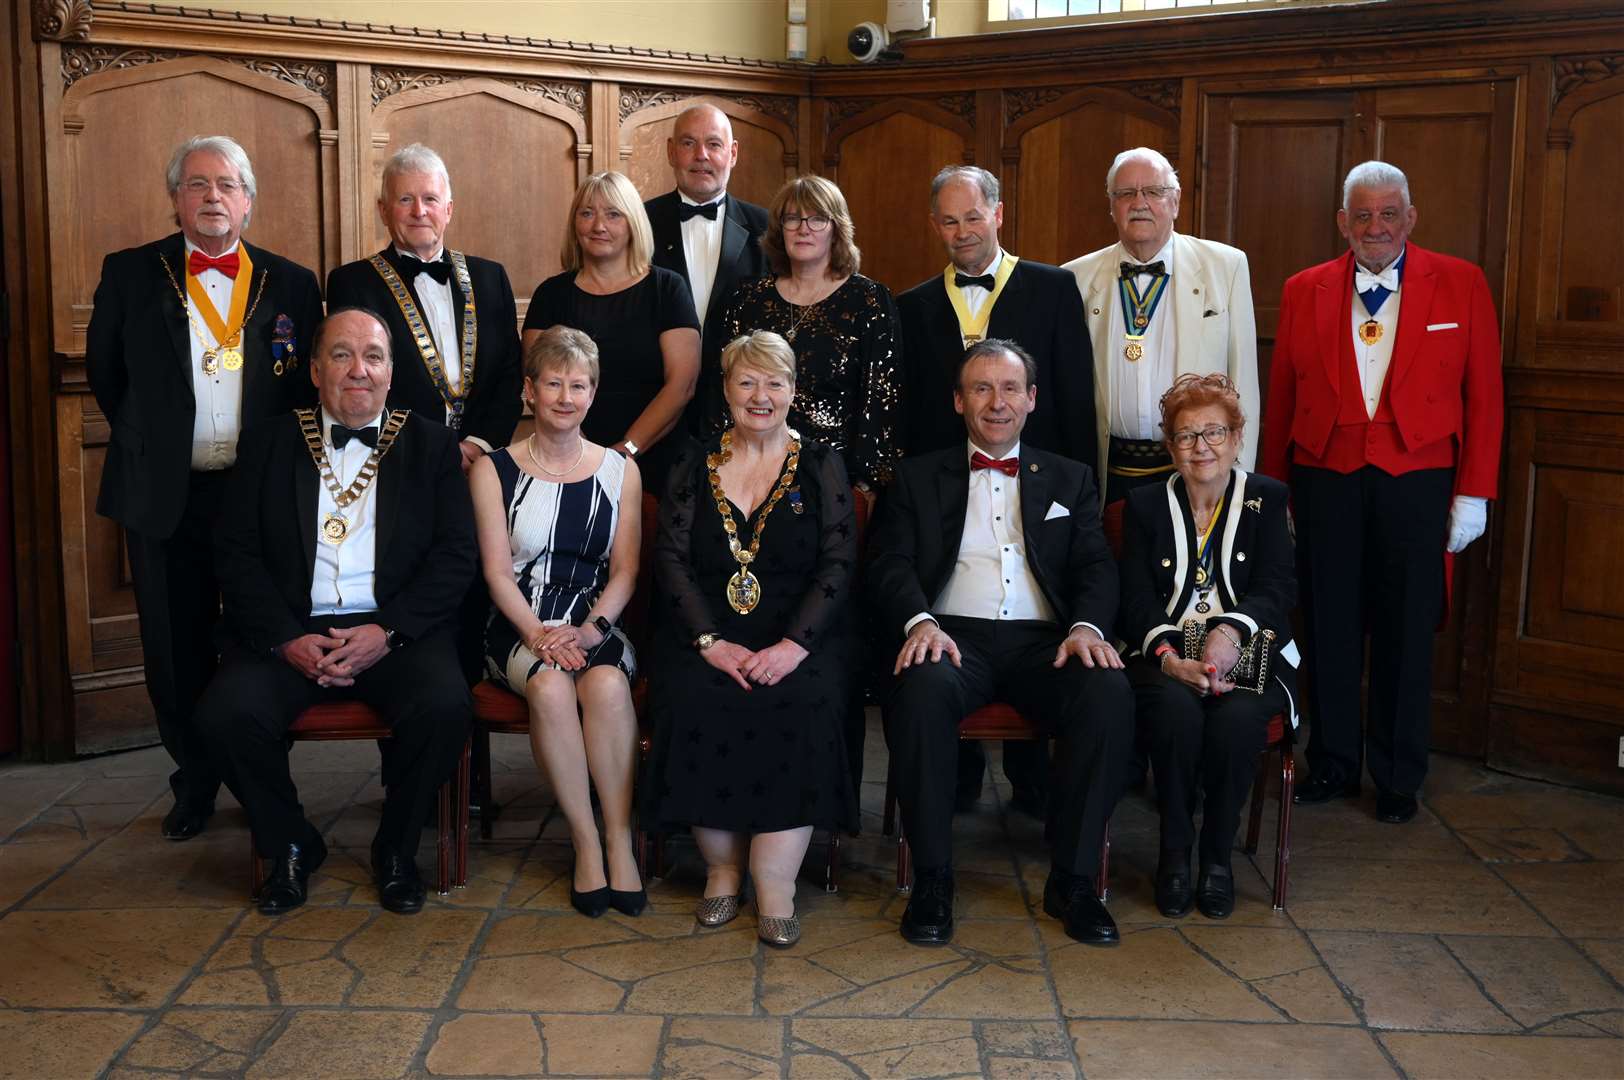 Mayor of West Norfolk, centre, Lesley Bambridge attended the occasion